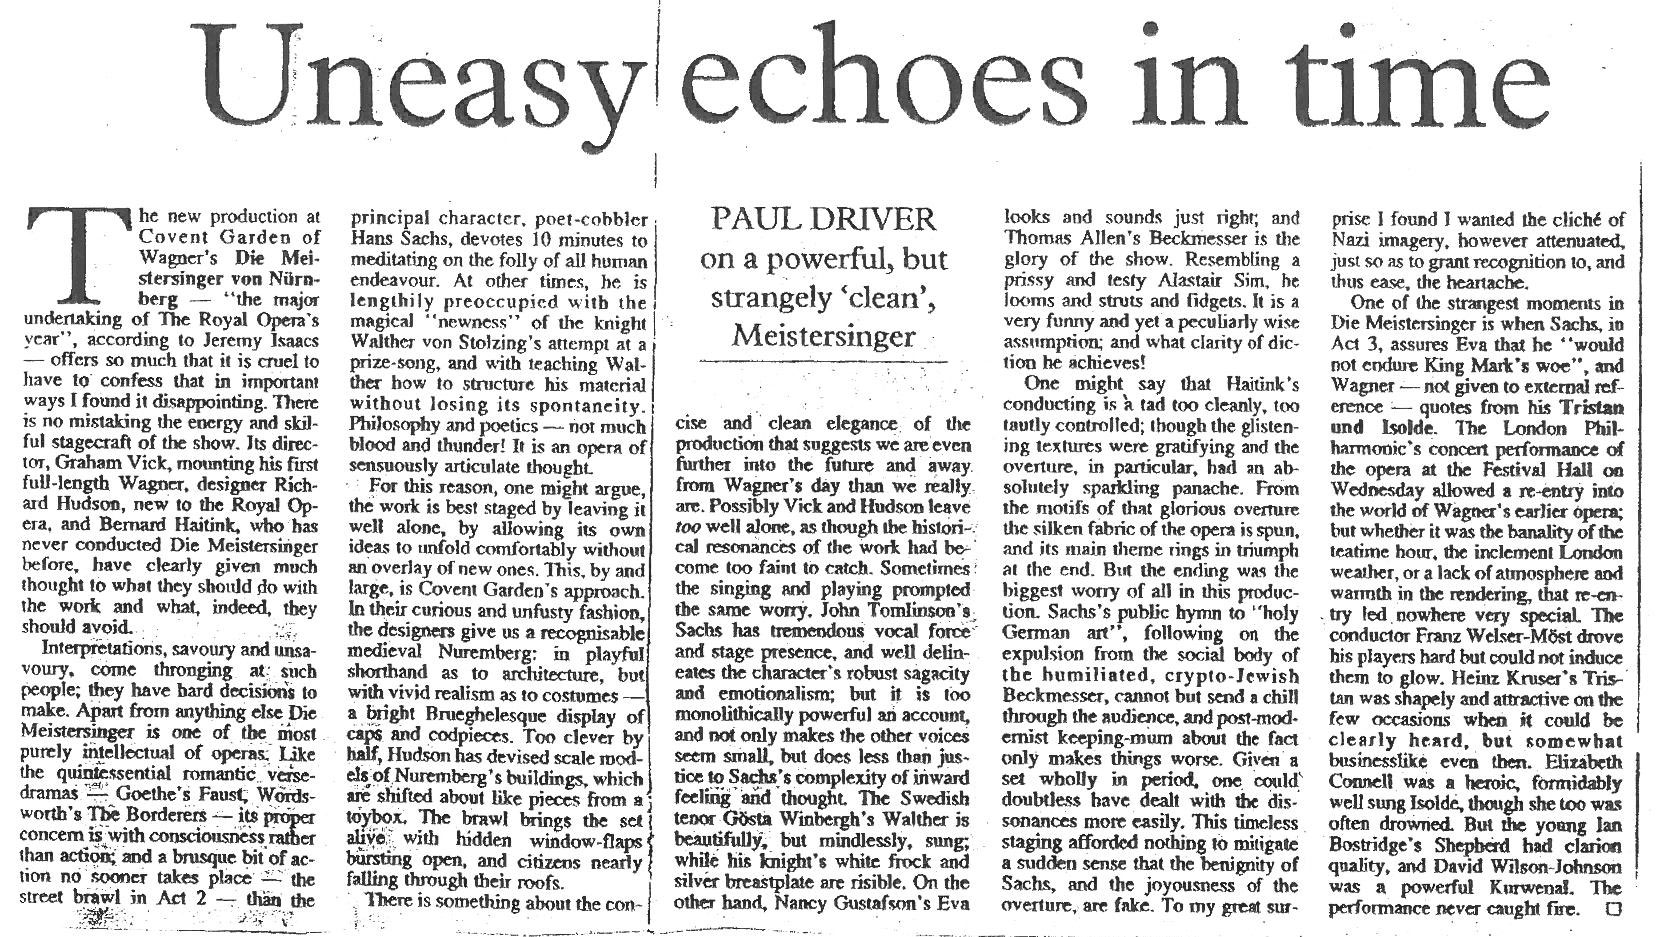 Review, 1993, The Sunday Times